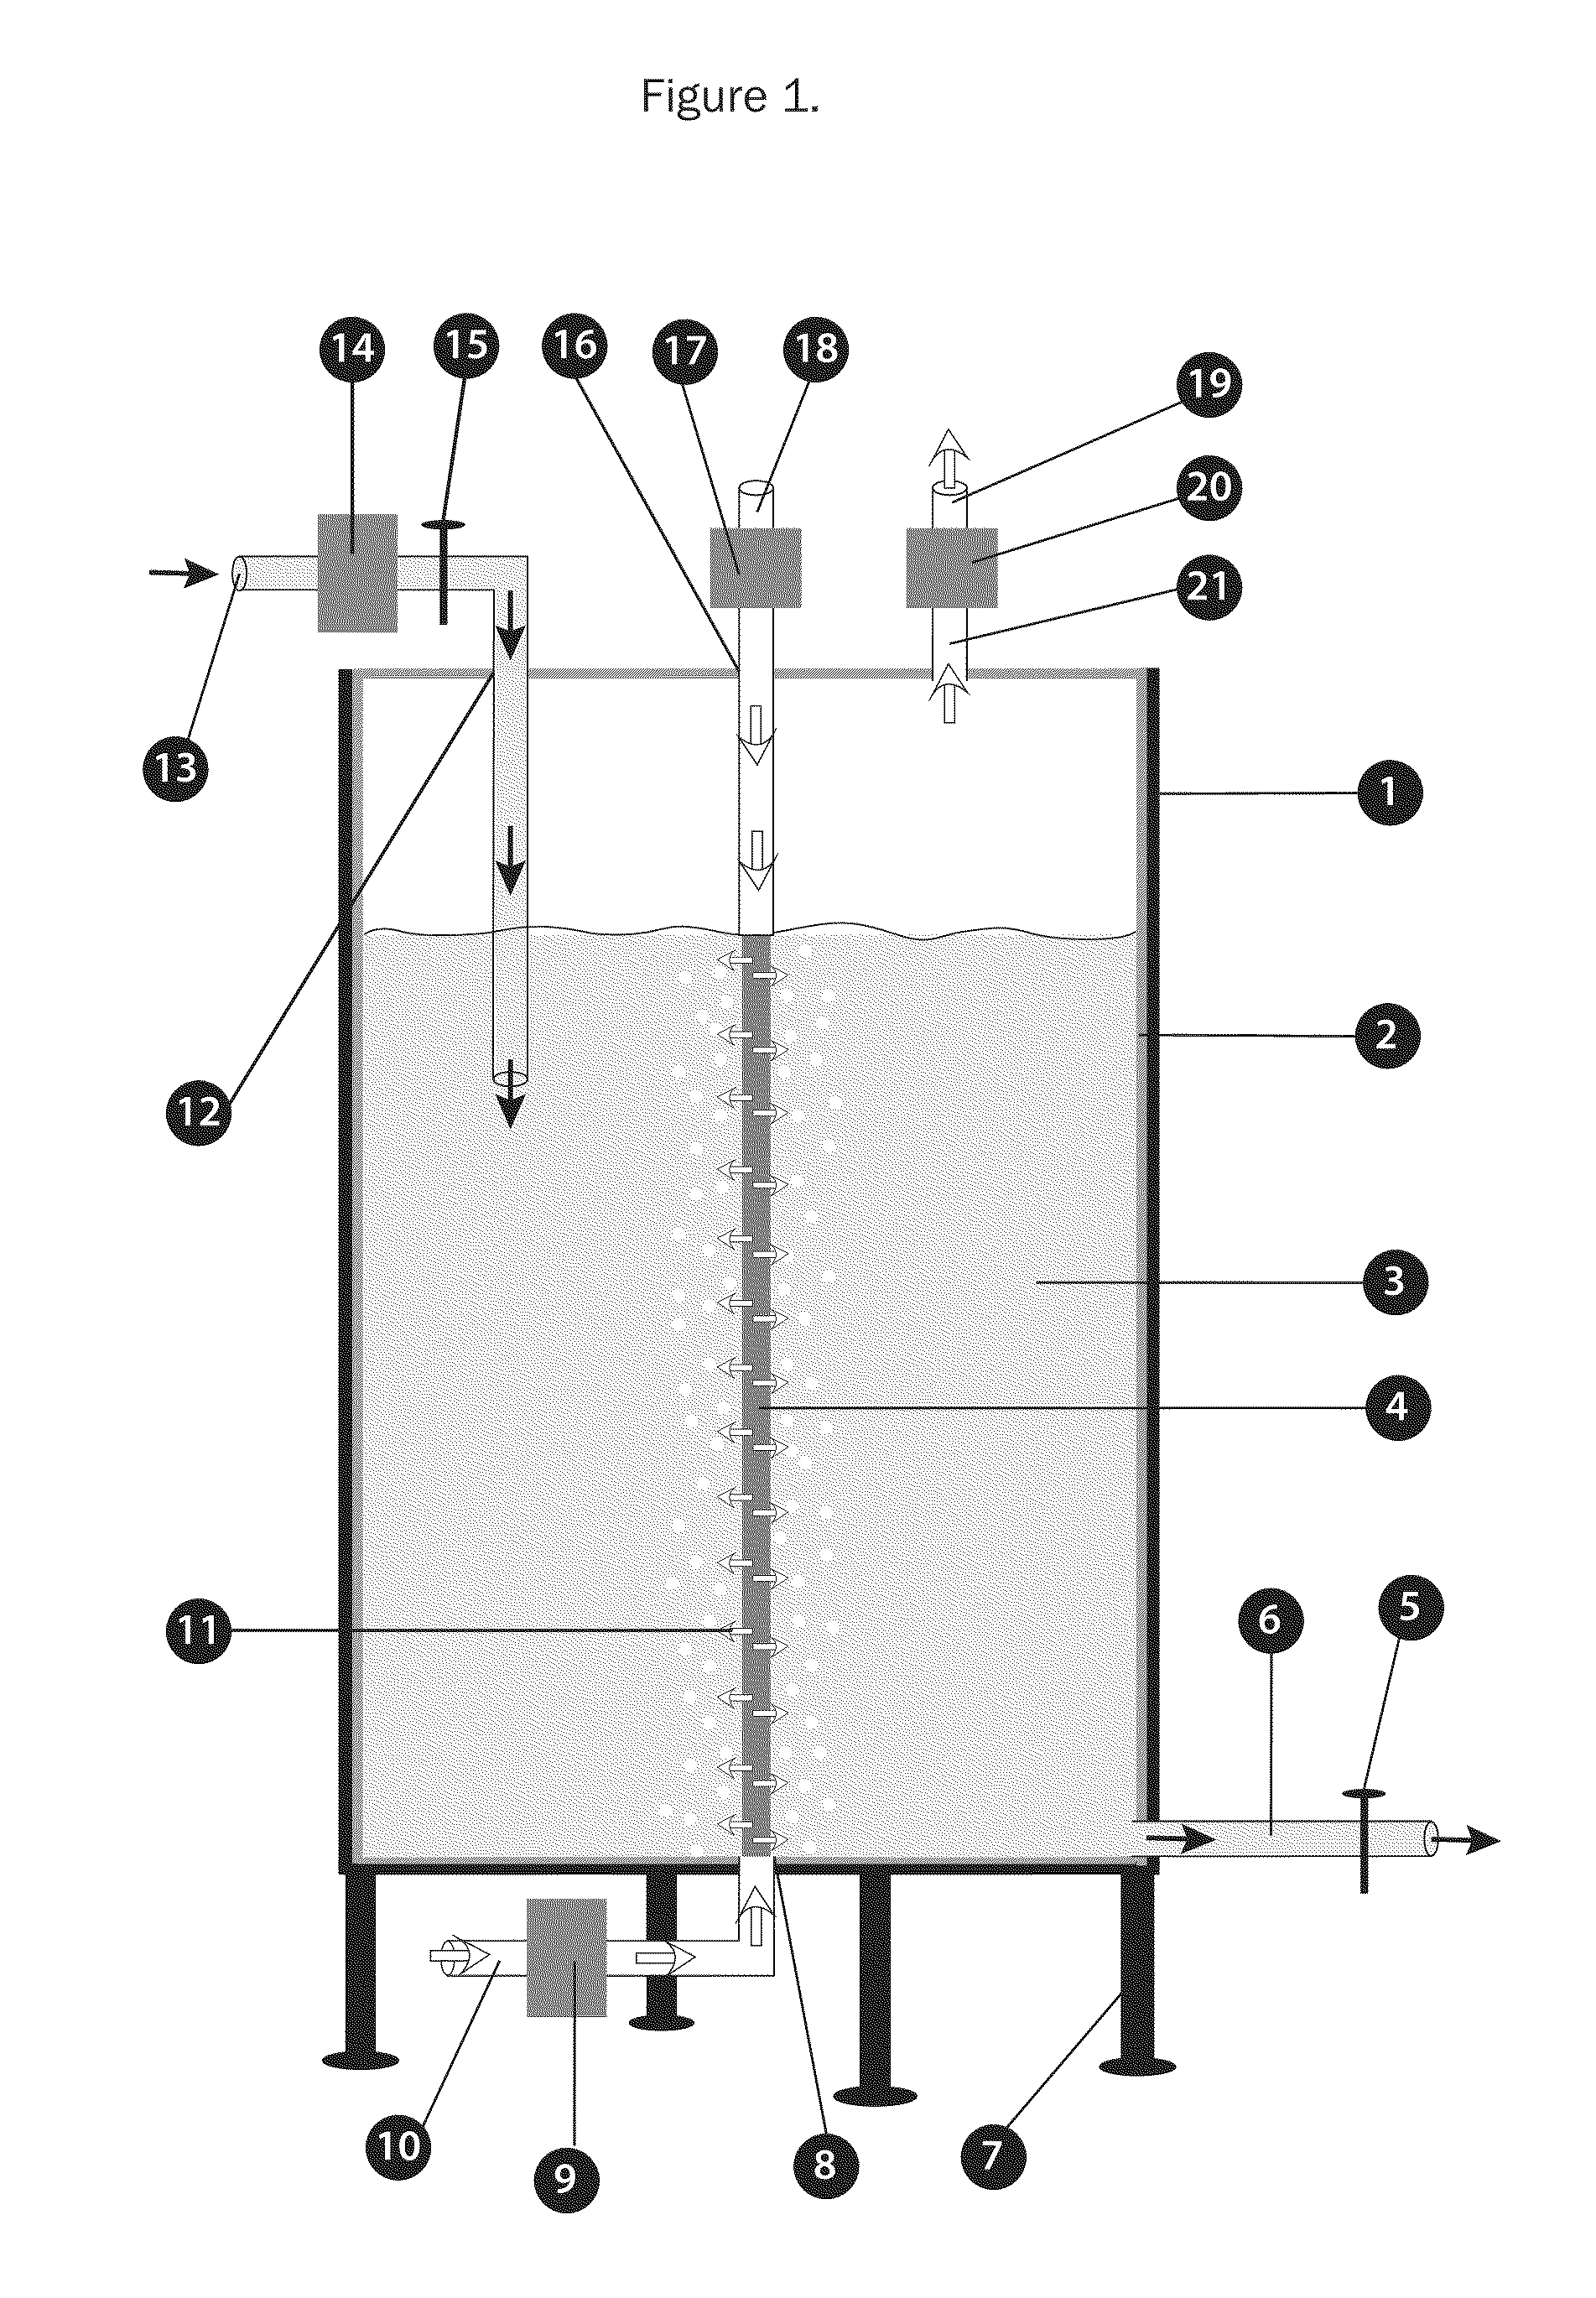 Bioreactors for fermentation and related methods